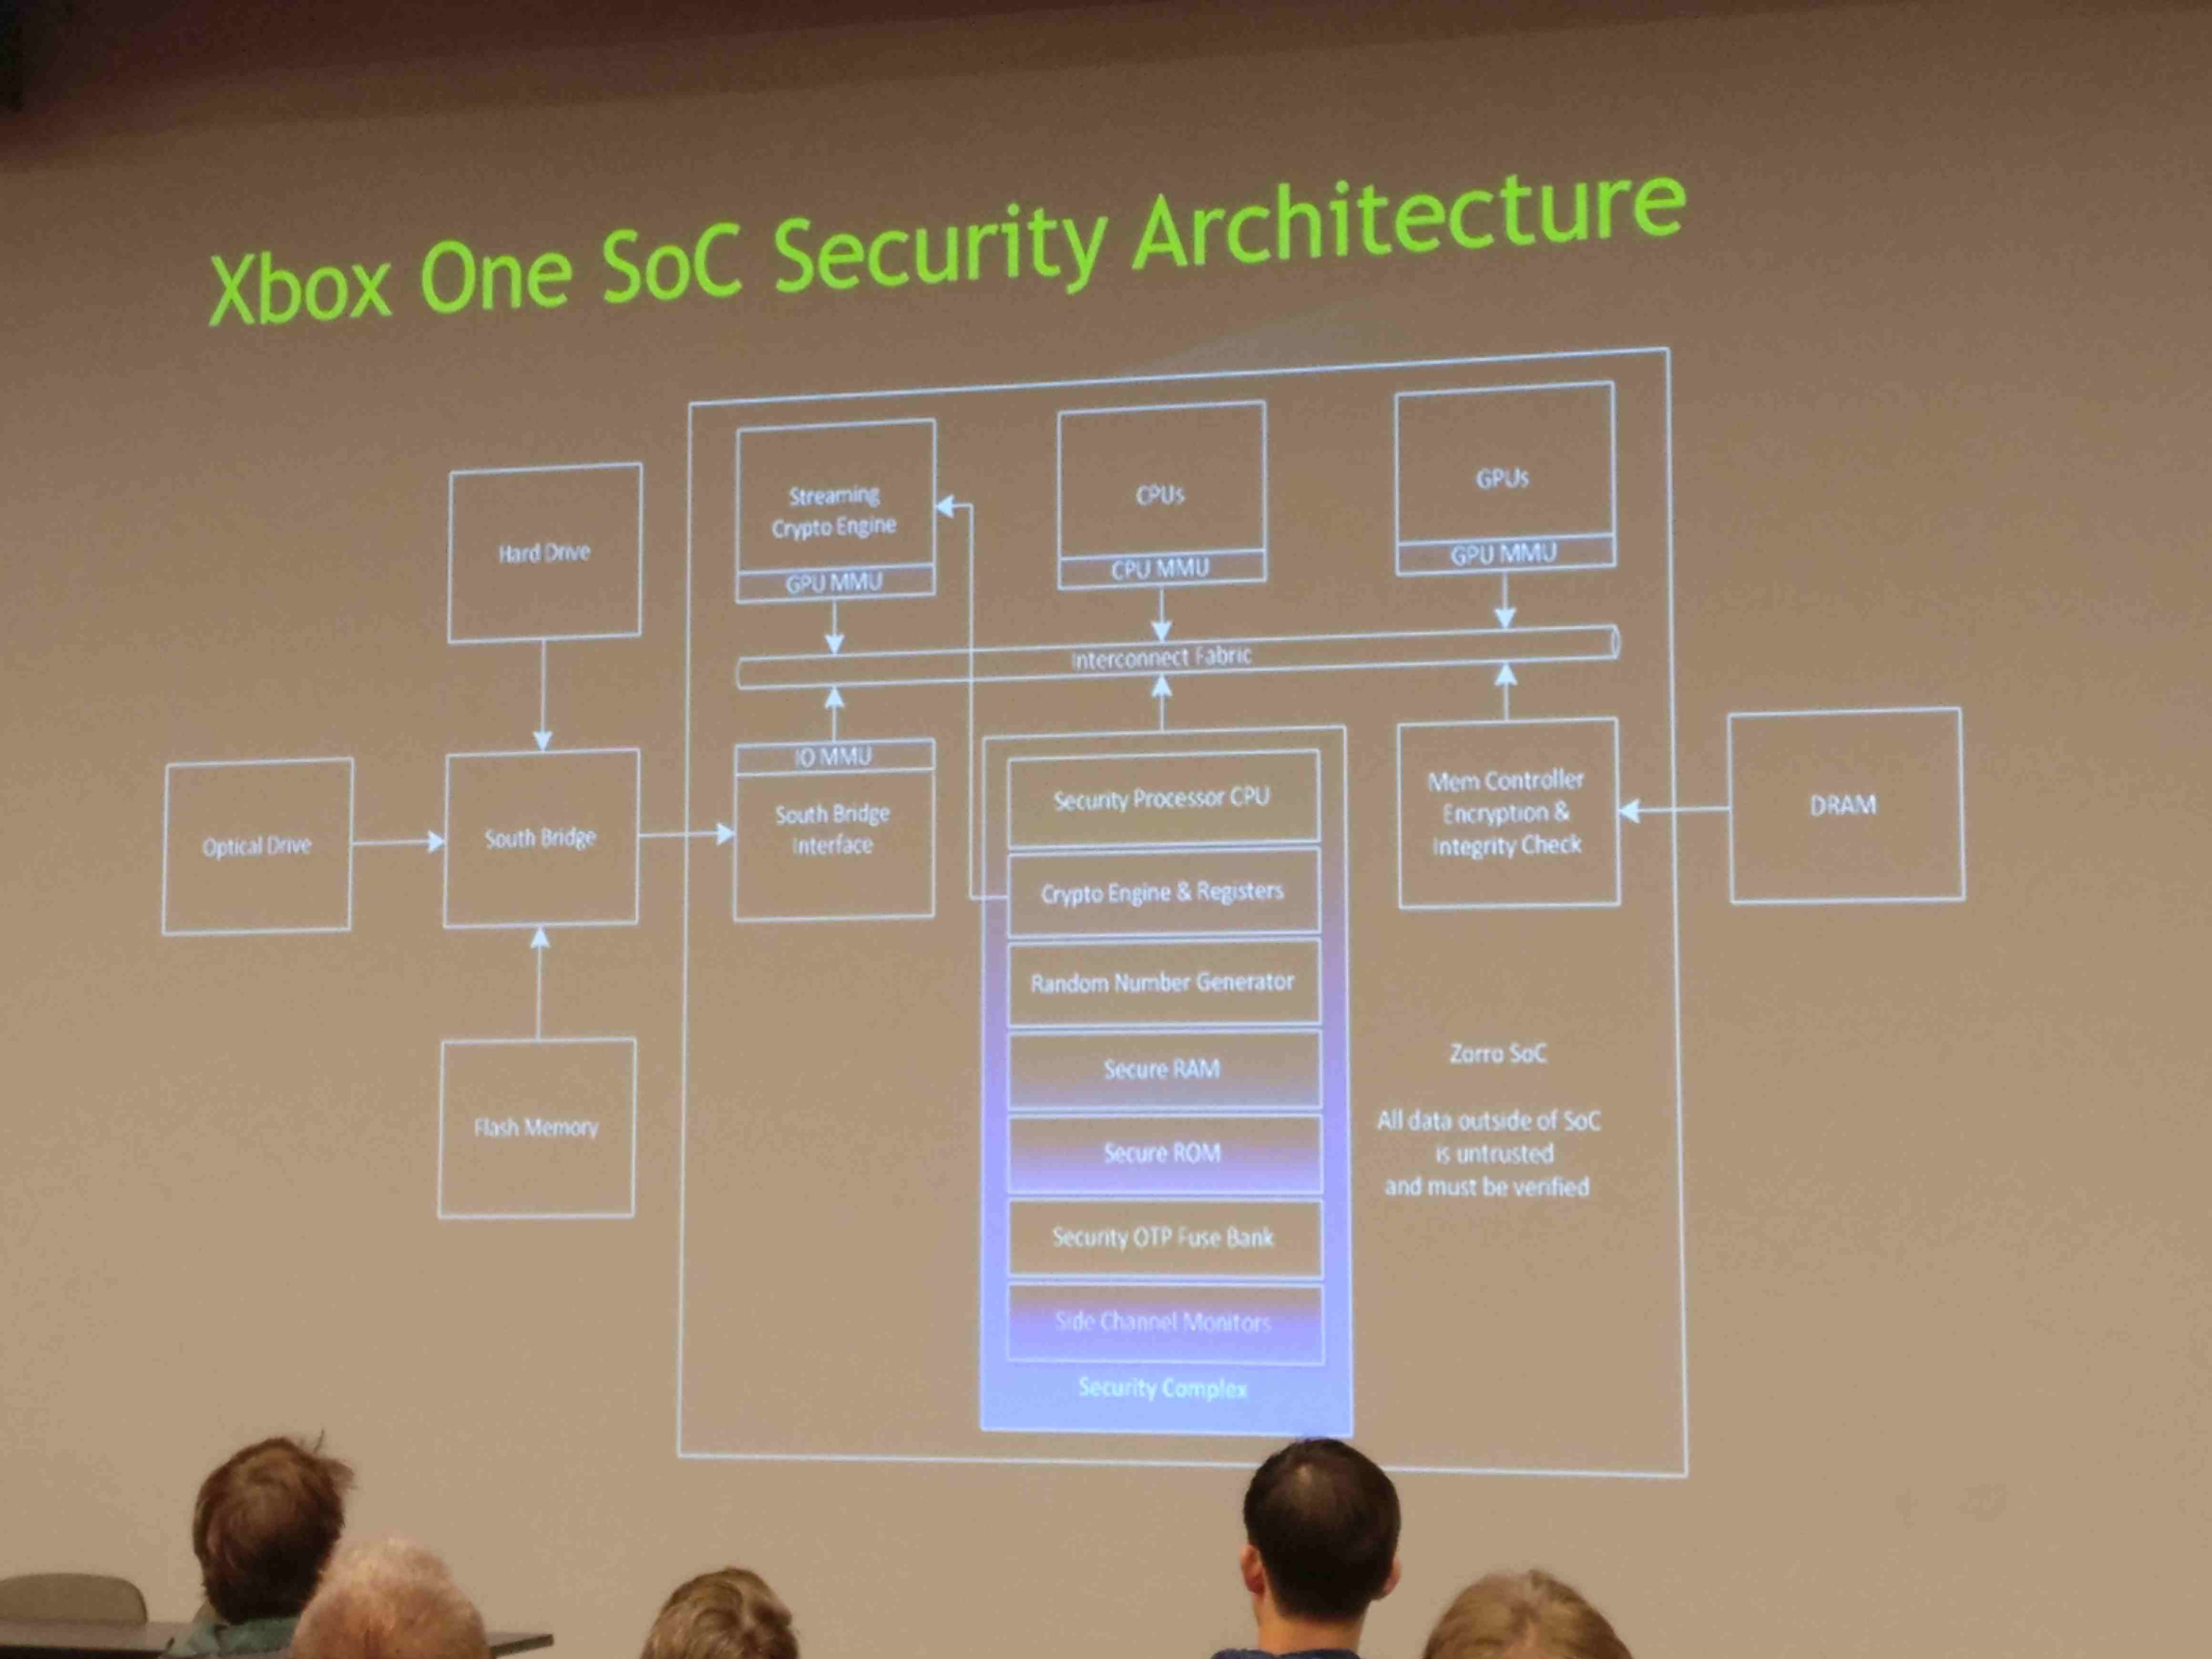 Security architecture